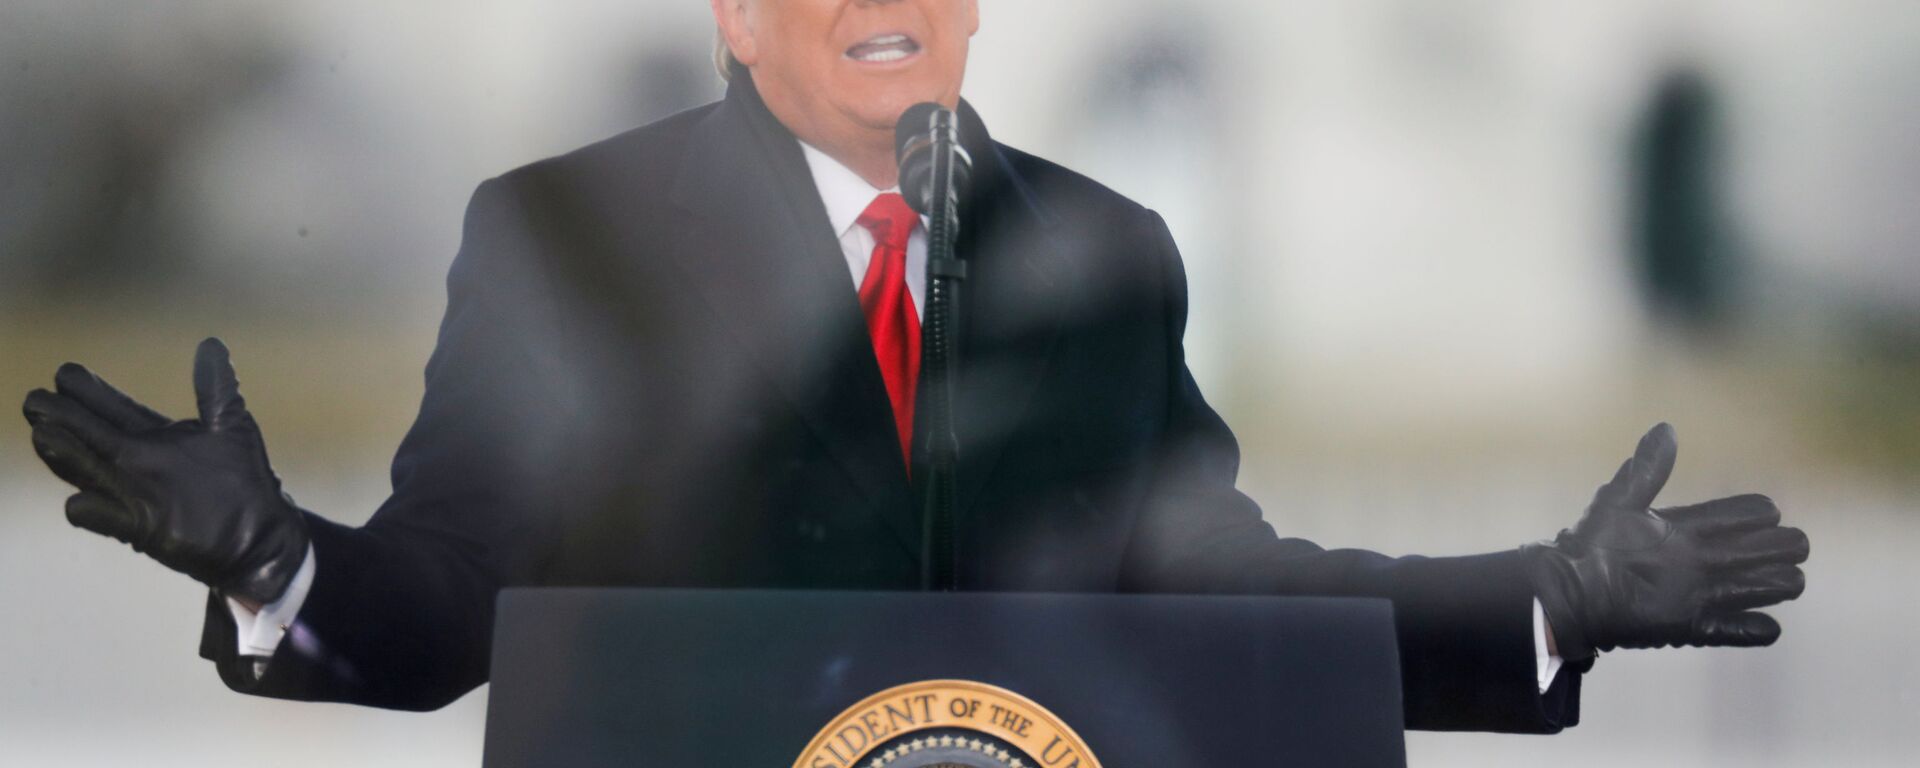 U.S. President Donald Trump speaks during a rally to contest the certification of the 2020 U.S. presidential election results by the U.S. Congress, in Washington, U.S, January 6, 2021. REUTERS/Jim Bourg/File Photo - Sputnik International, 1920, 01.03.2021